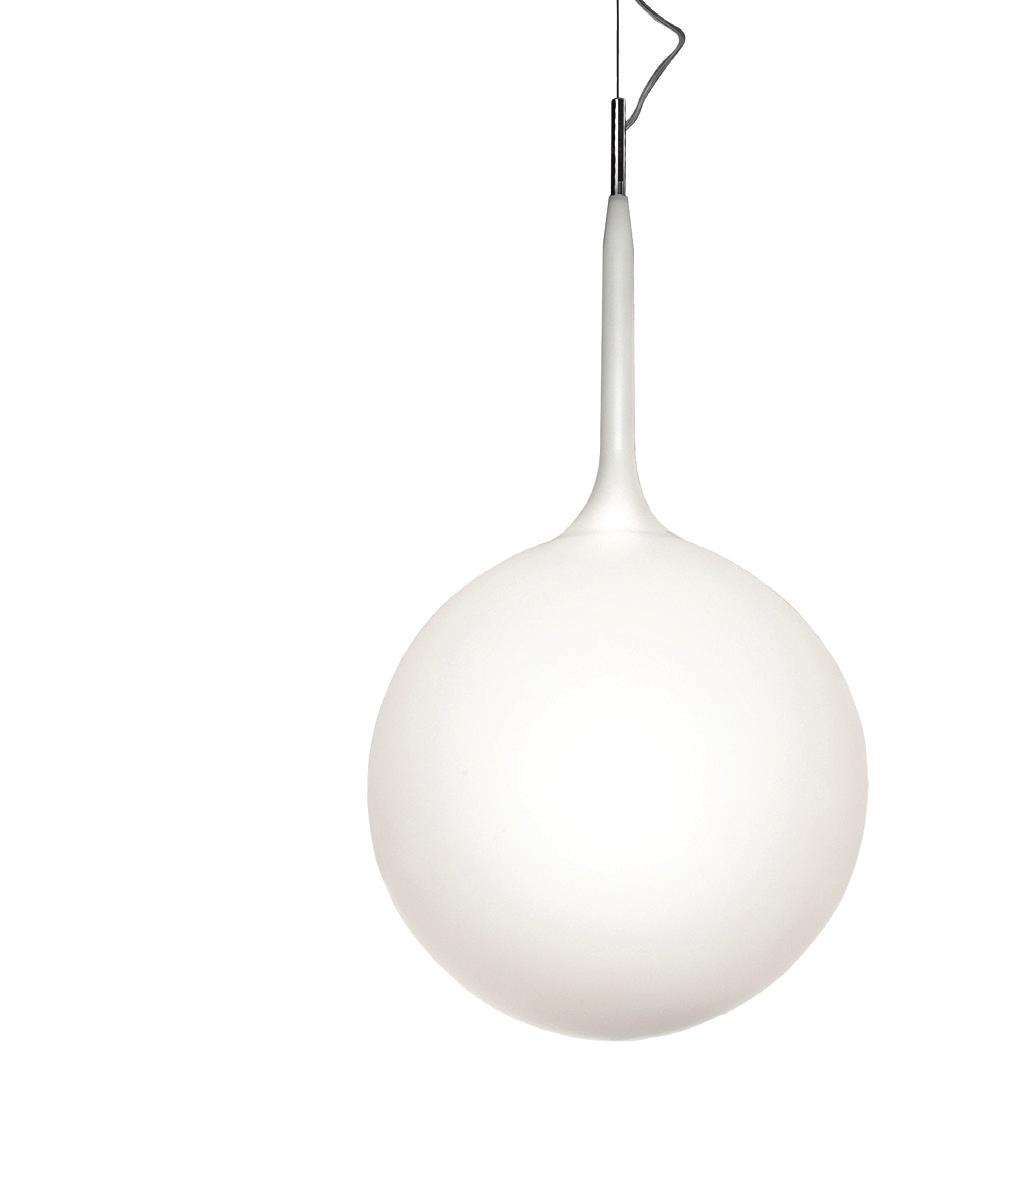 Castore is best suited for warm lighting, providing a peaceful